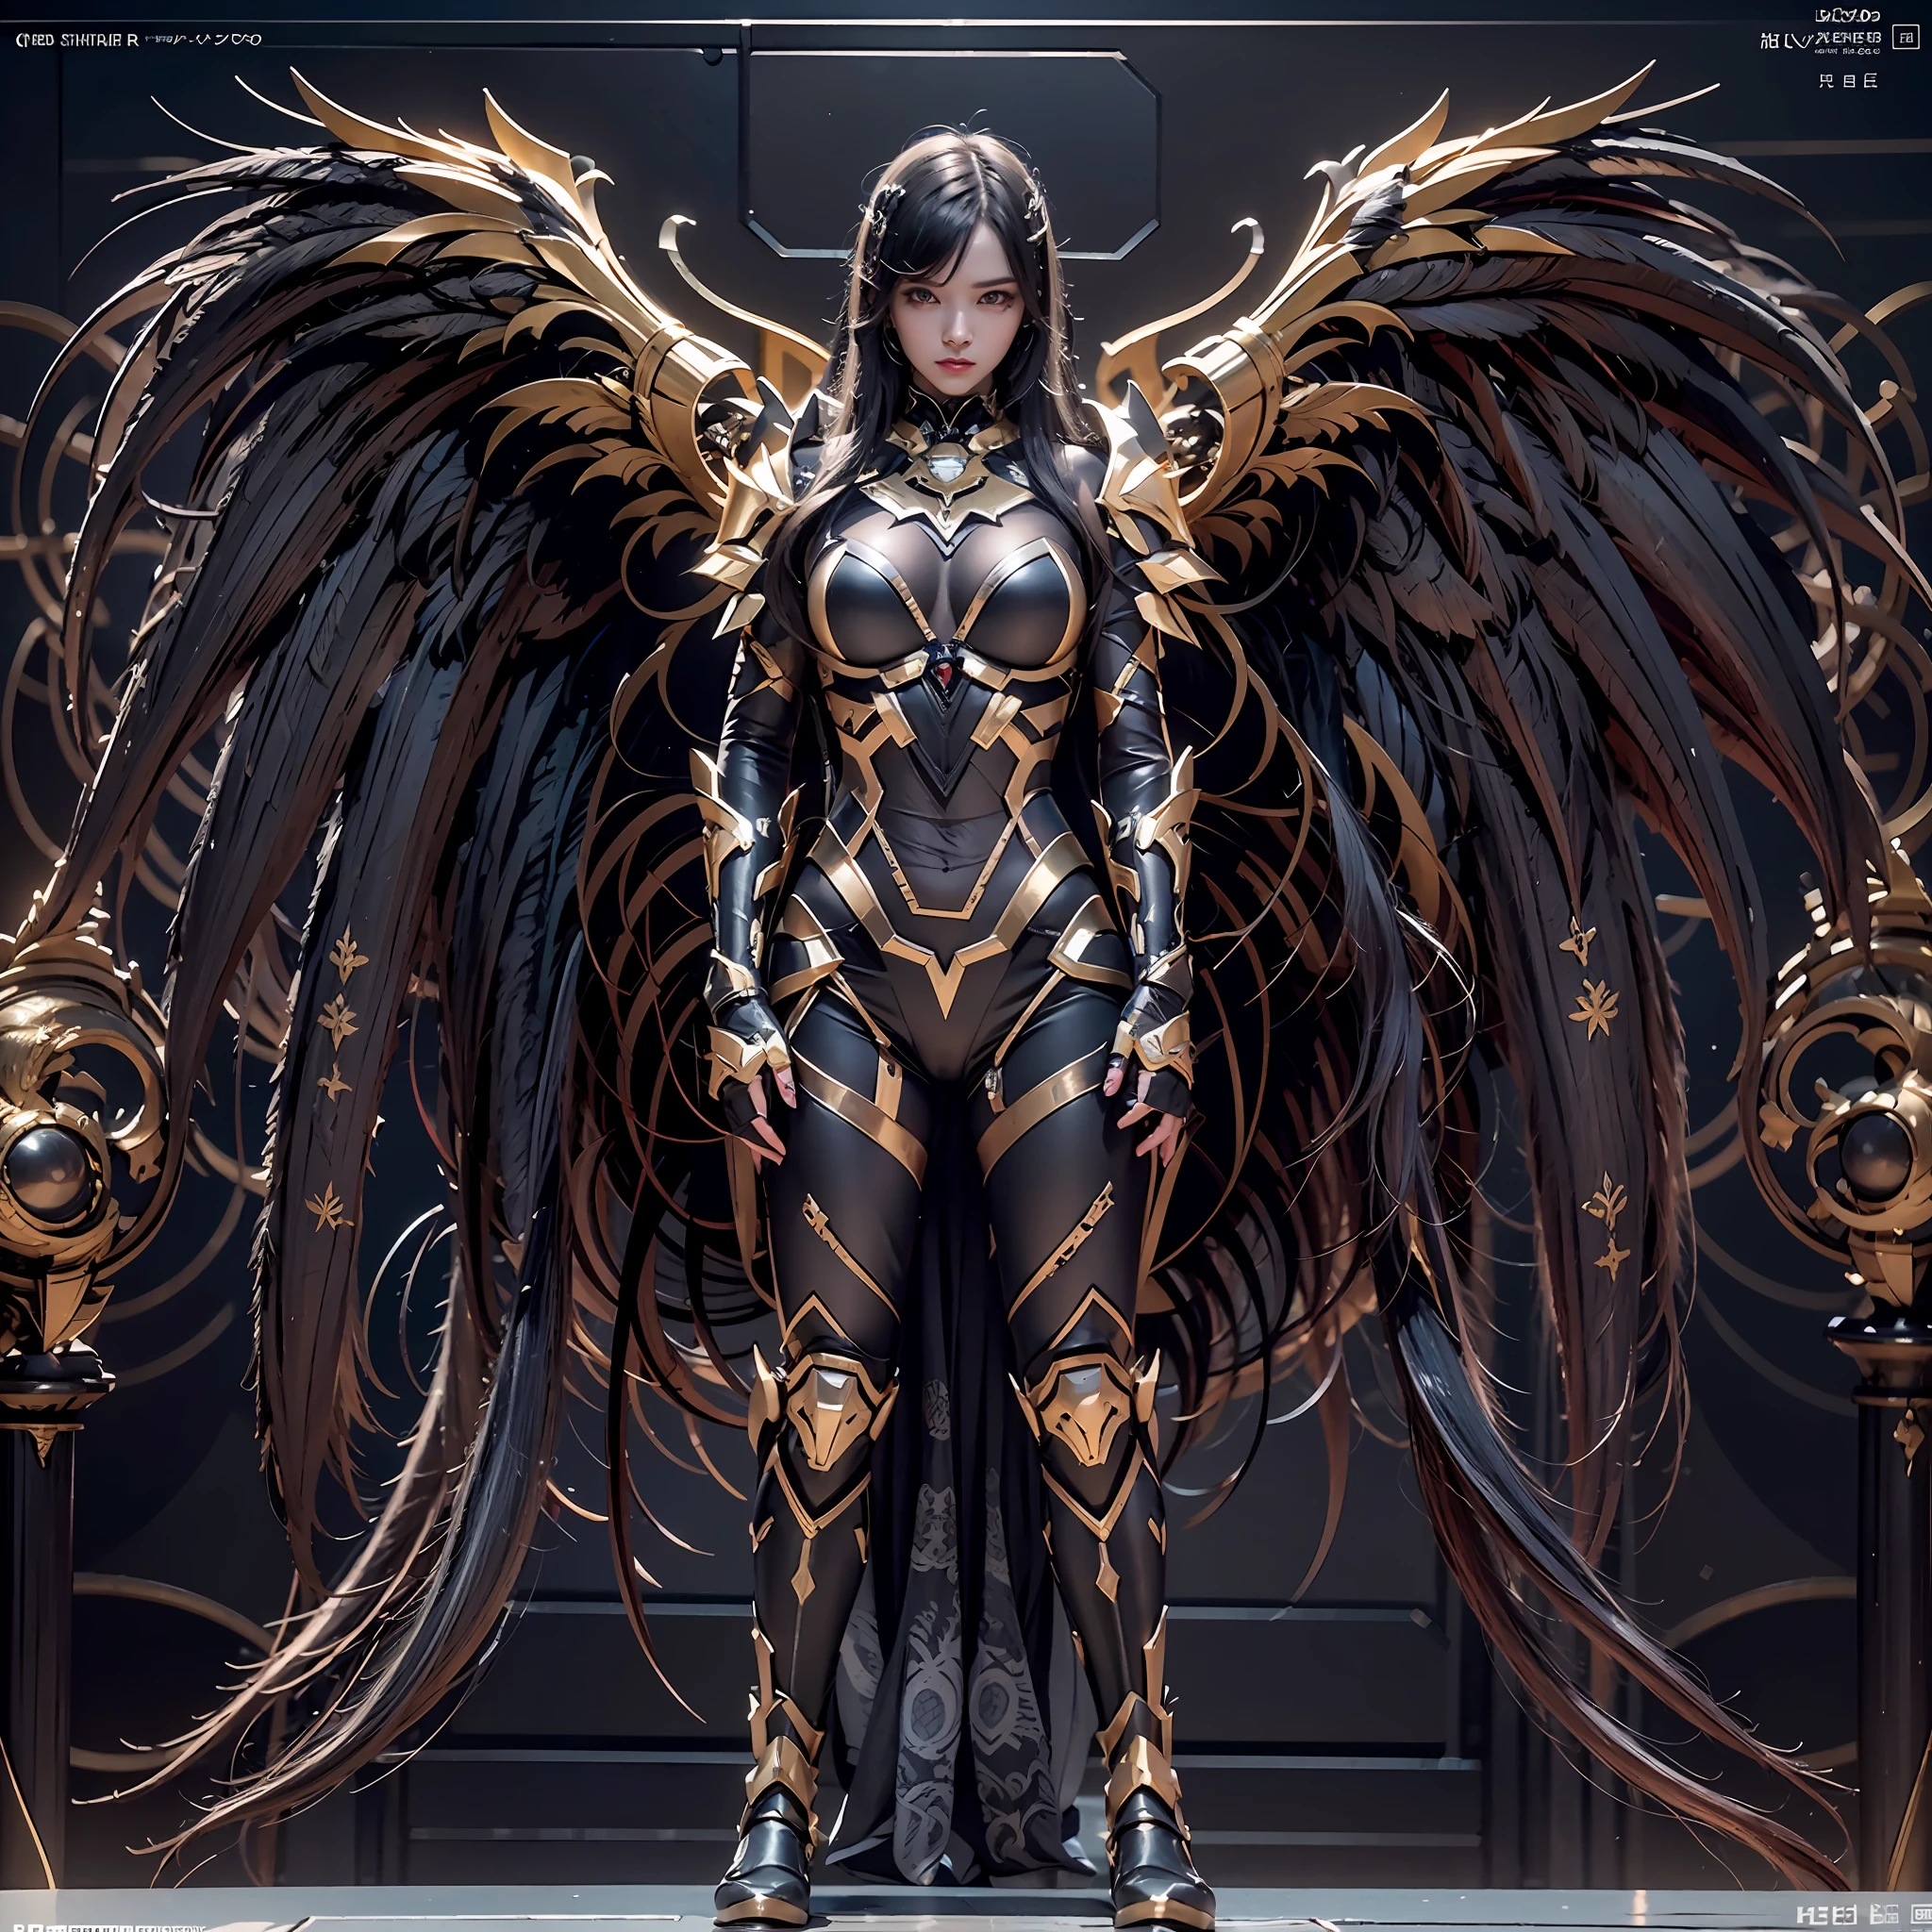 1girll，Dark Angel Warrior，(((On the back there is a pair of large black half-body wings)))，Black titanium，Metal wingetal wings）），（（Black gold metal armor）），high detal，（beautifulface），Perfect facial features，red tinted hair，Black and gold greatsword，Futuristic technical background，apathy、Aloof、On the high horse，atmospurate、macro，Realistis，hdr（HighDynamicRange）、Ray traching、NVIDIA RTX、Hyper-Resolution、illusory 5、sub surface scattering、post-proces、Anisotropy Filtering、depth of fieldaximum definition and sharpness，Surface coloring、Accurately simulate light-material interactions、perfectly proportions、rendering by octane、largeaperture、Low ISO、White balance、the rule of thirds、8K raw data、lightand shade contrast